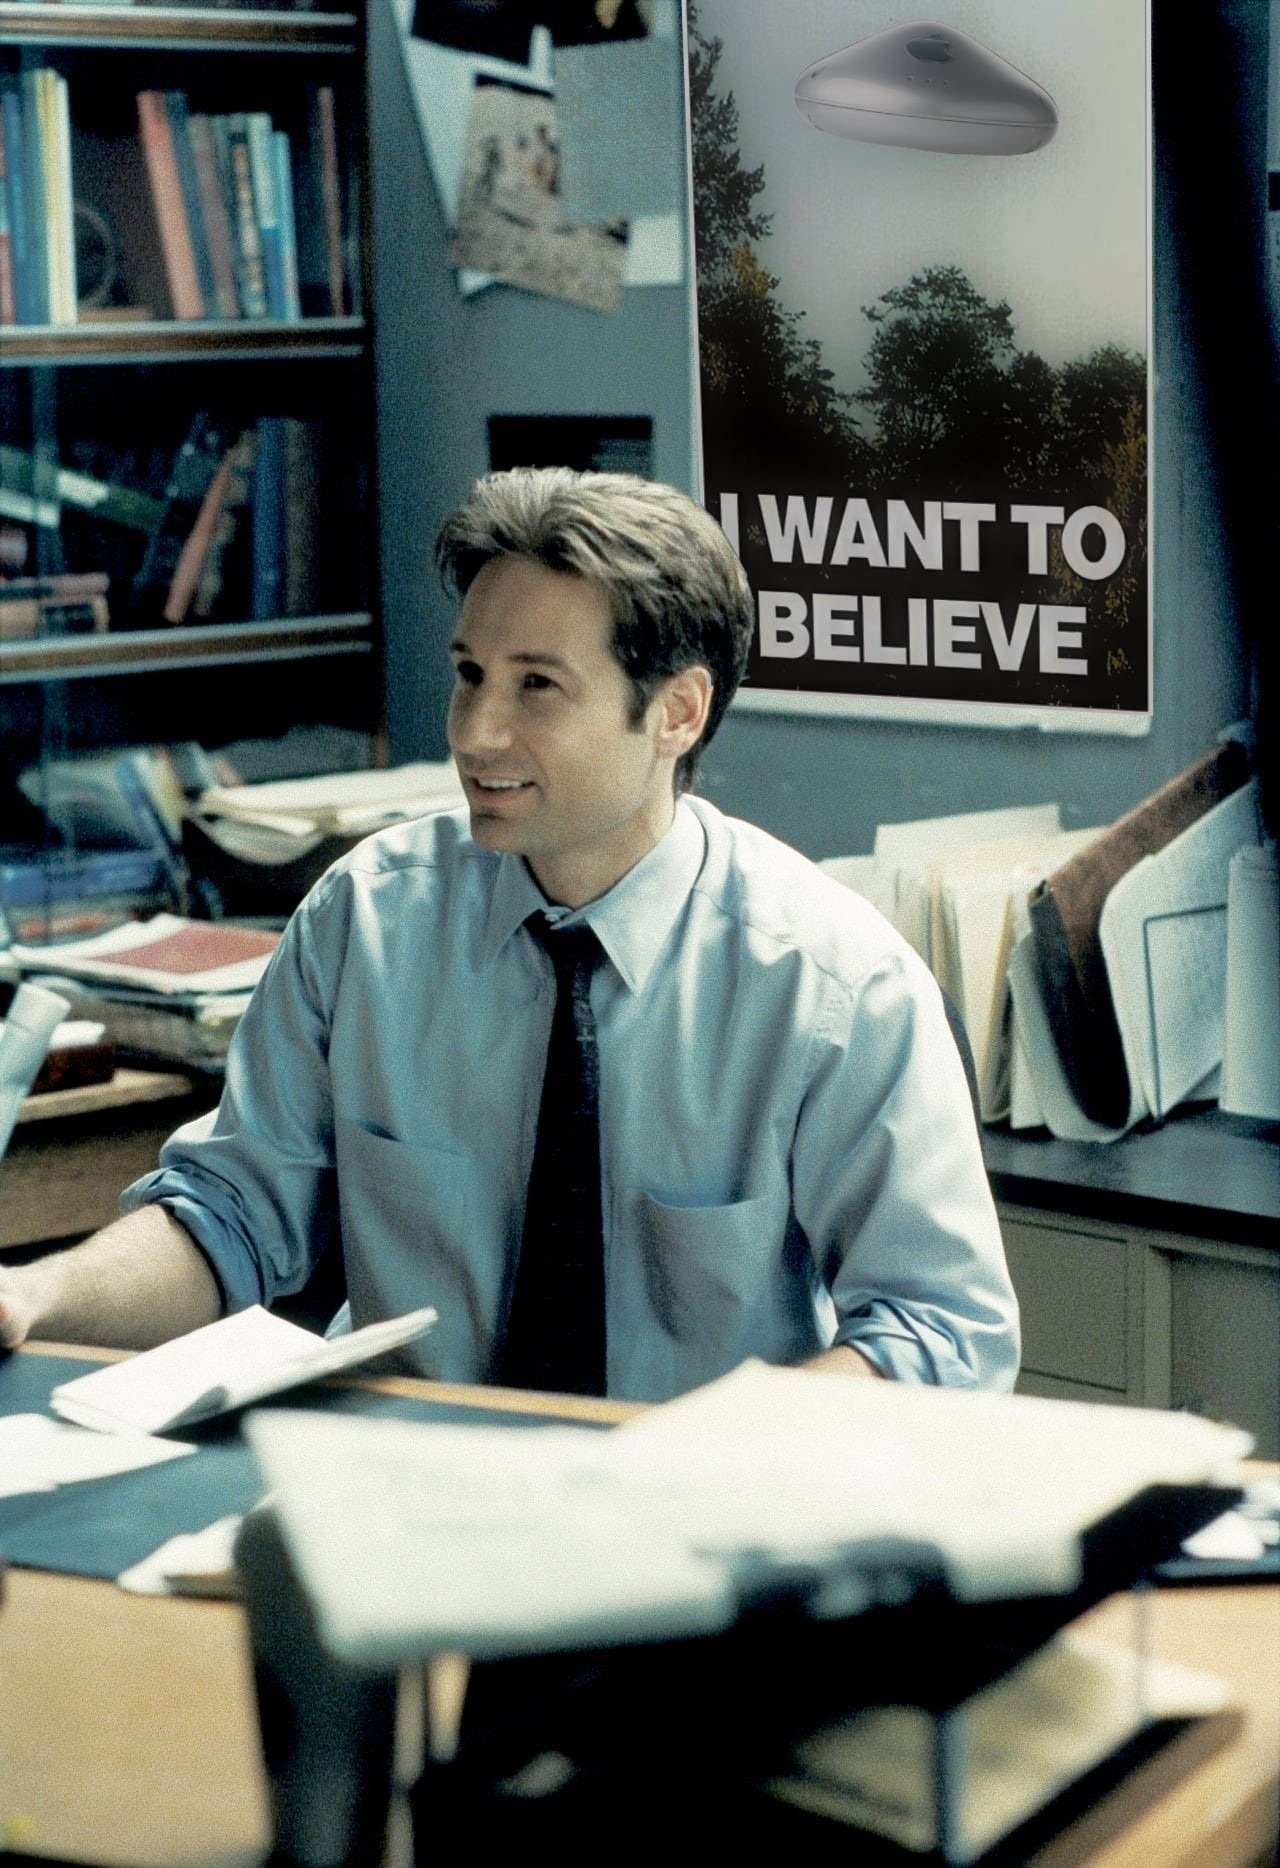 Fox Mulder in the cluttered X-Files basement office with the I Want to Believe poster hung up behind him.